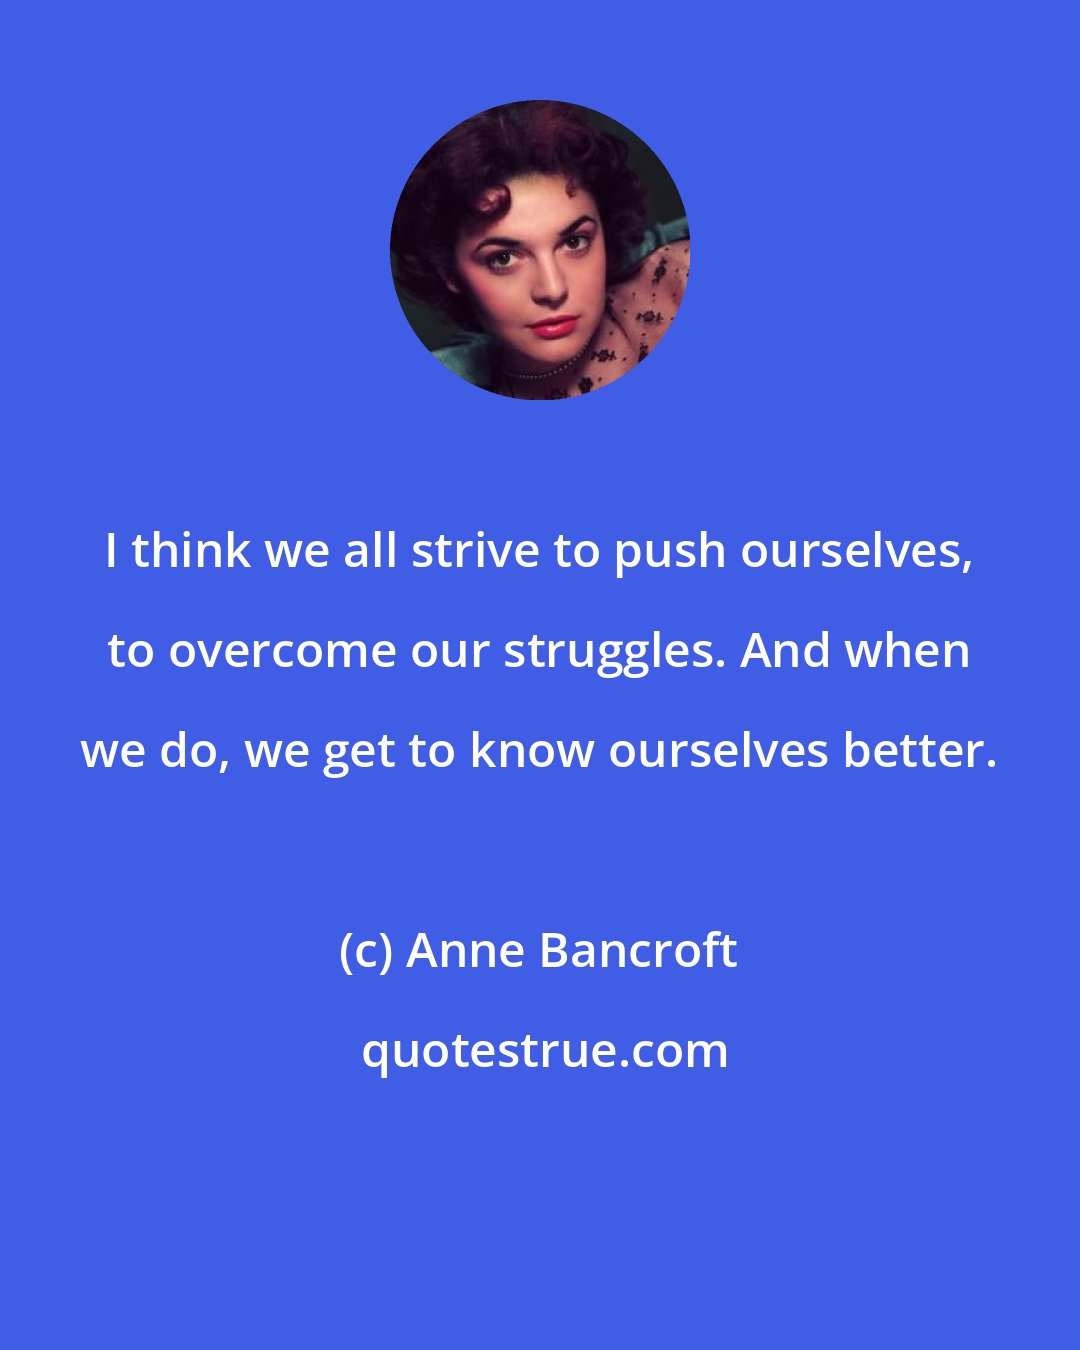 Anne Bancroft: I think we all strive to push ourselves, to overcome our struggles. And when we do, we get to know ourselves better.